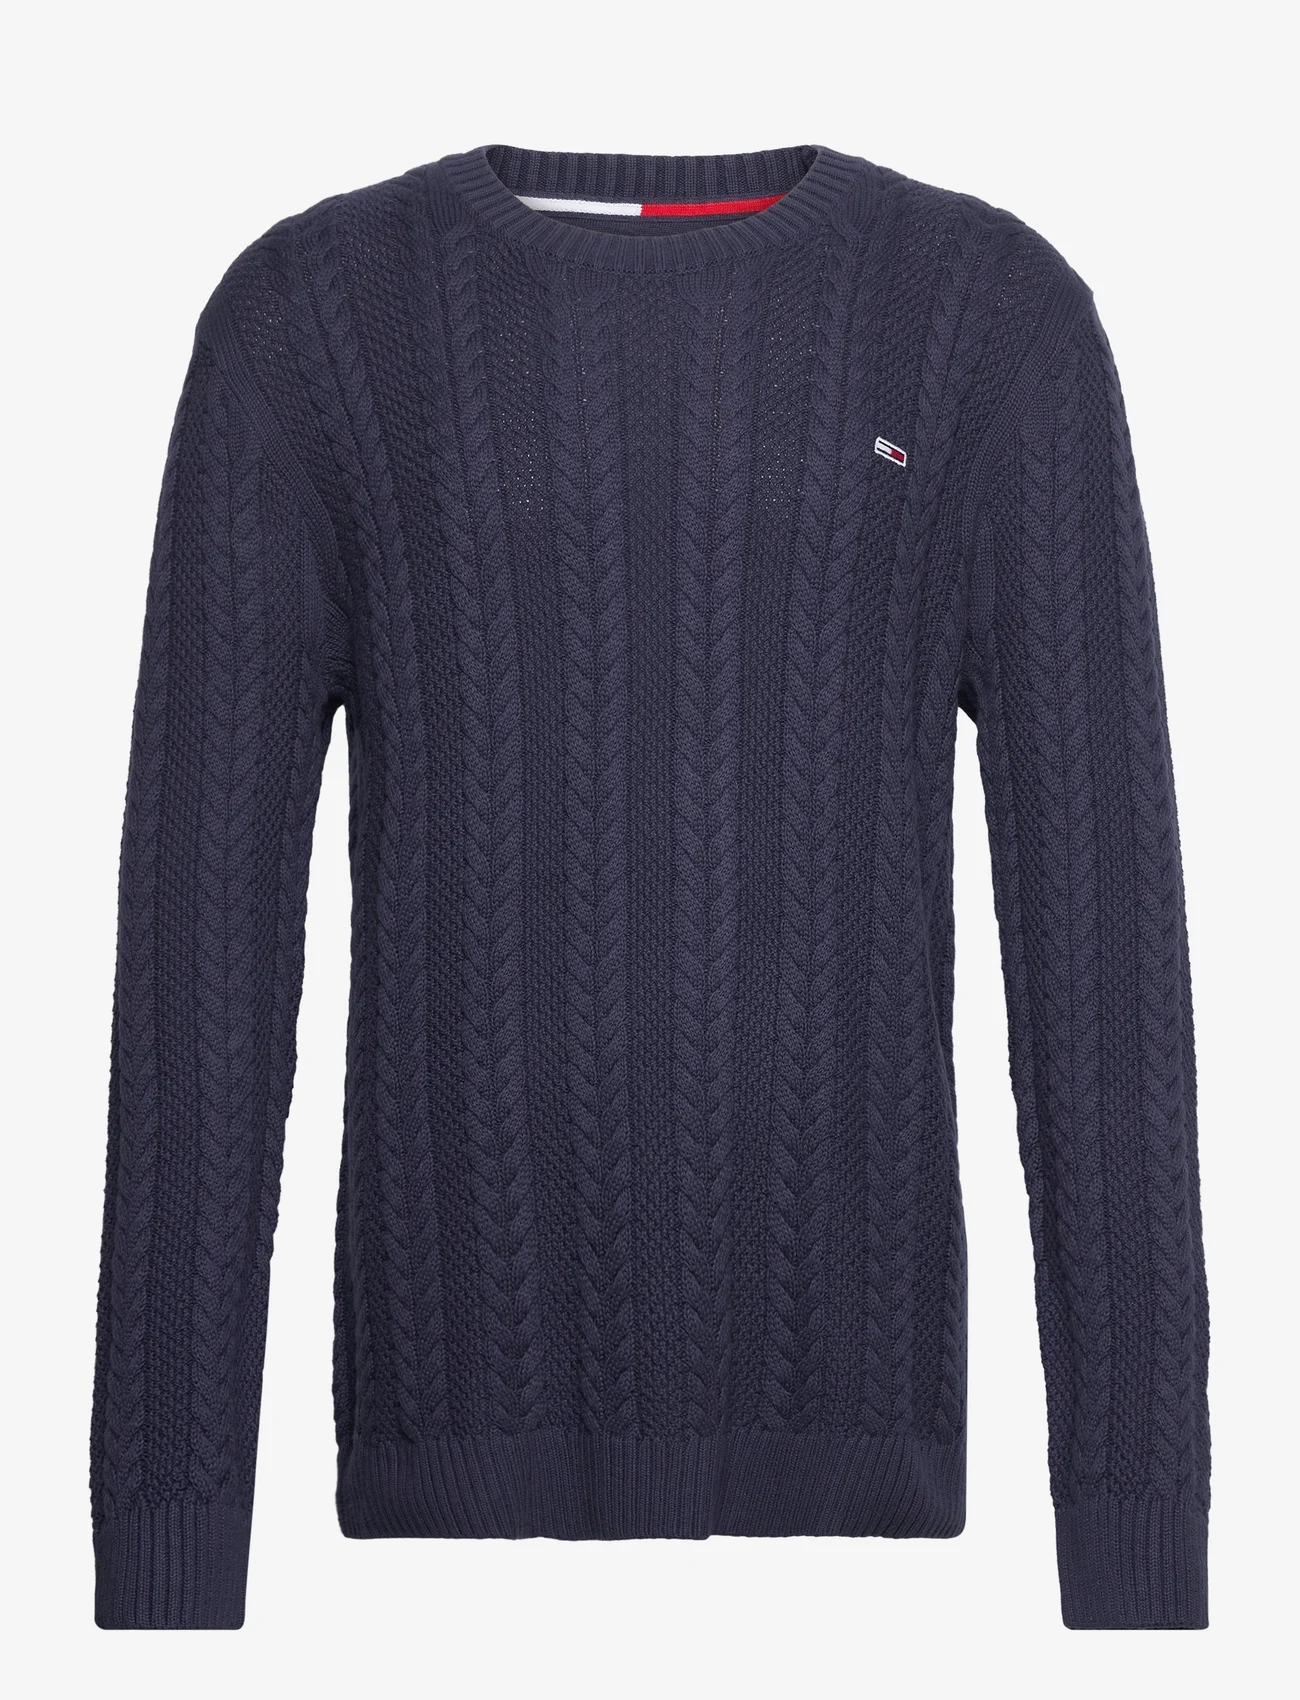 Tommy Jeans - TJM REG CABLE SWEATER - knitted round necks - twilight navy - 0